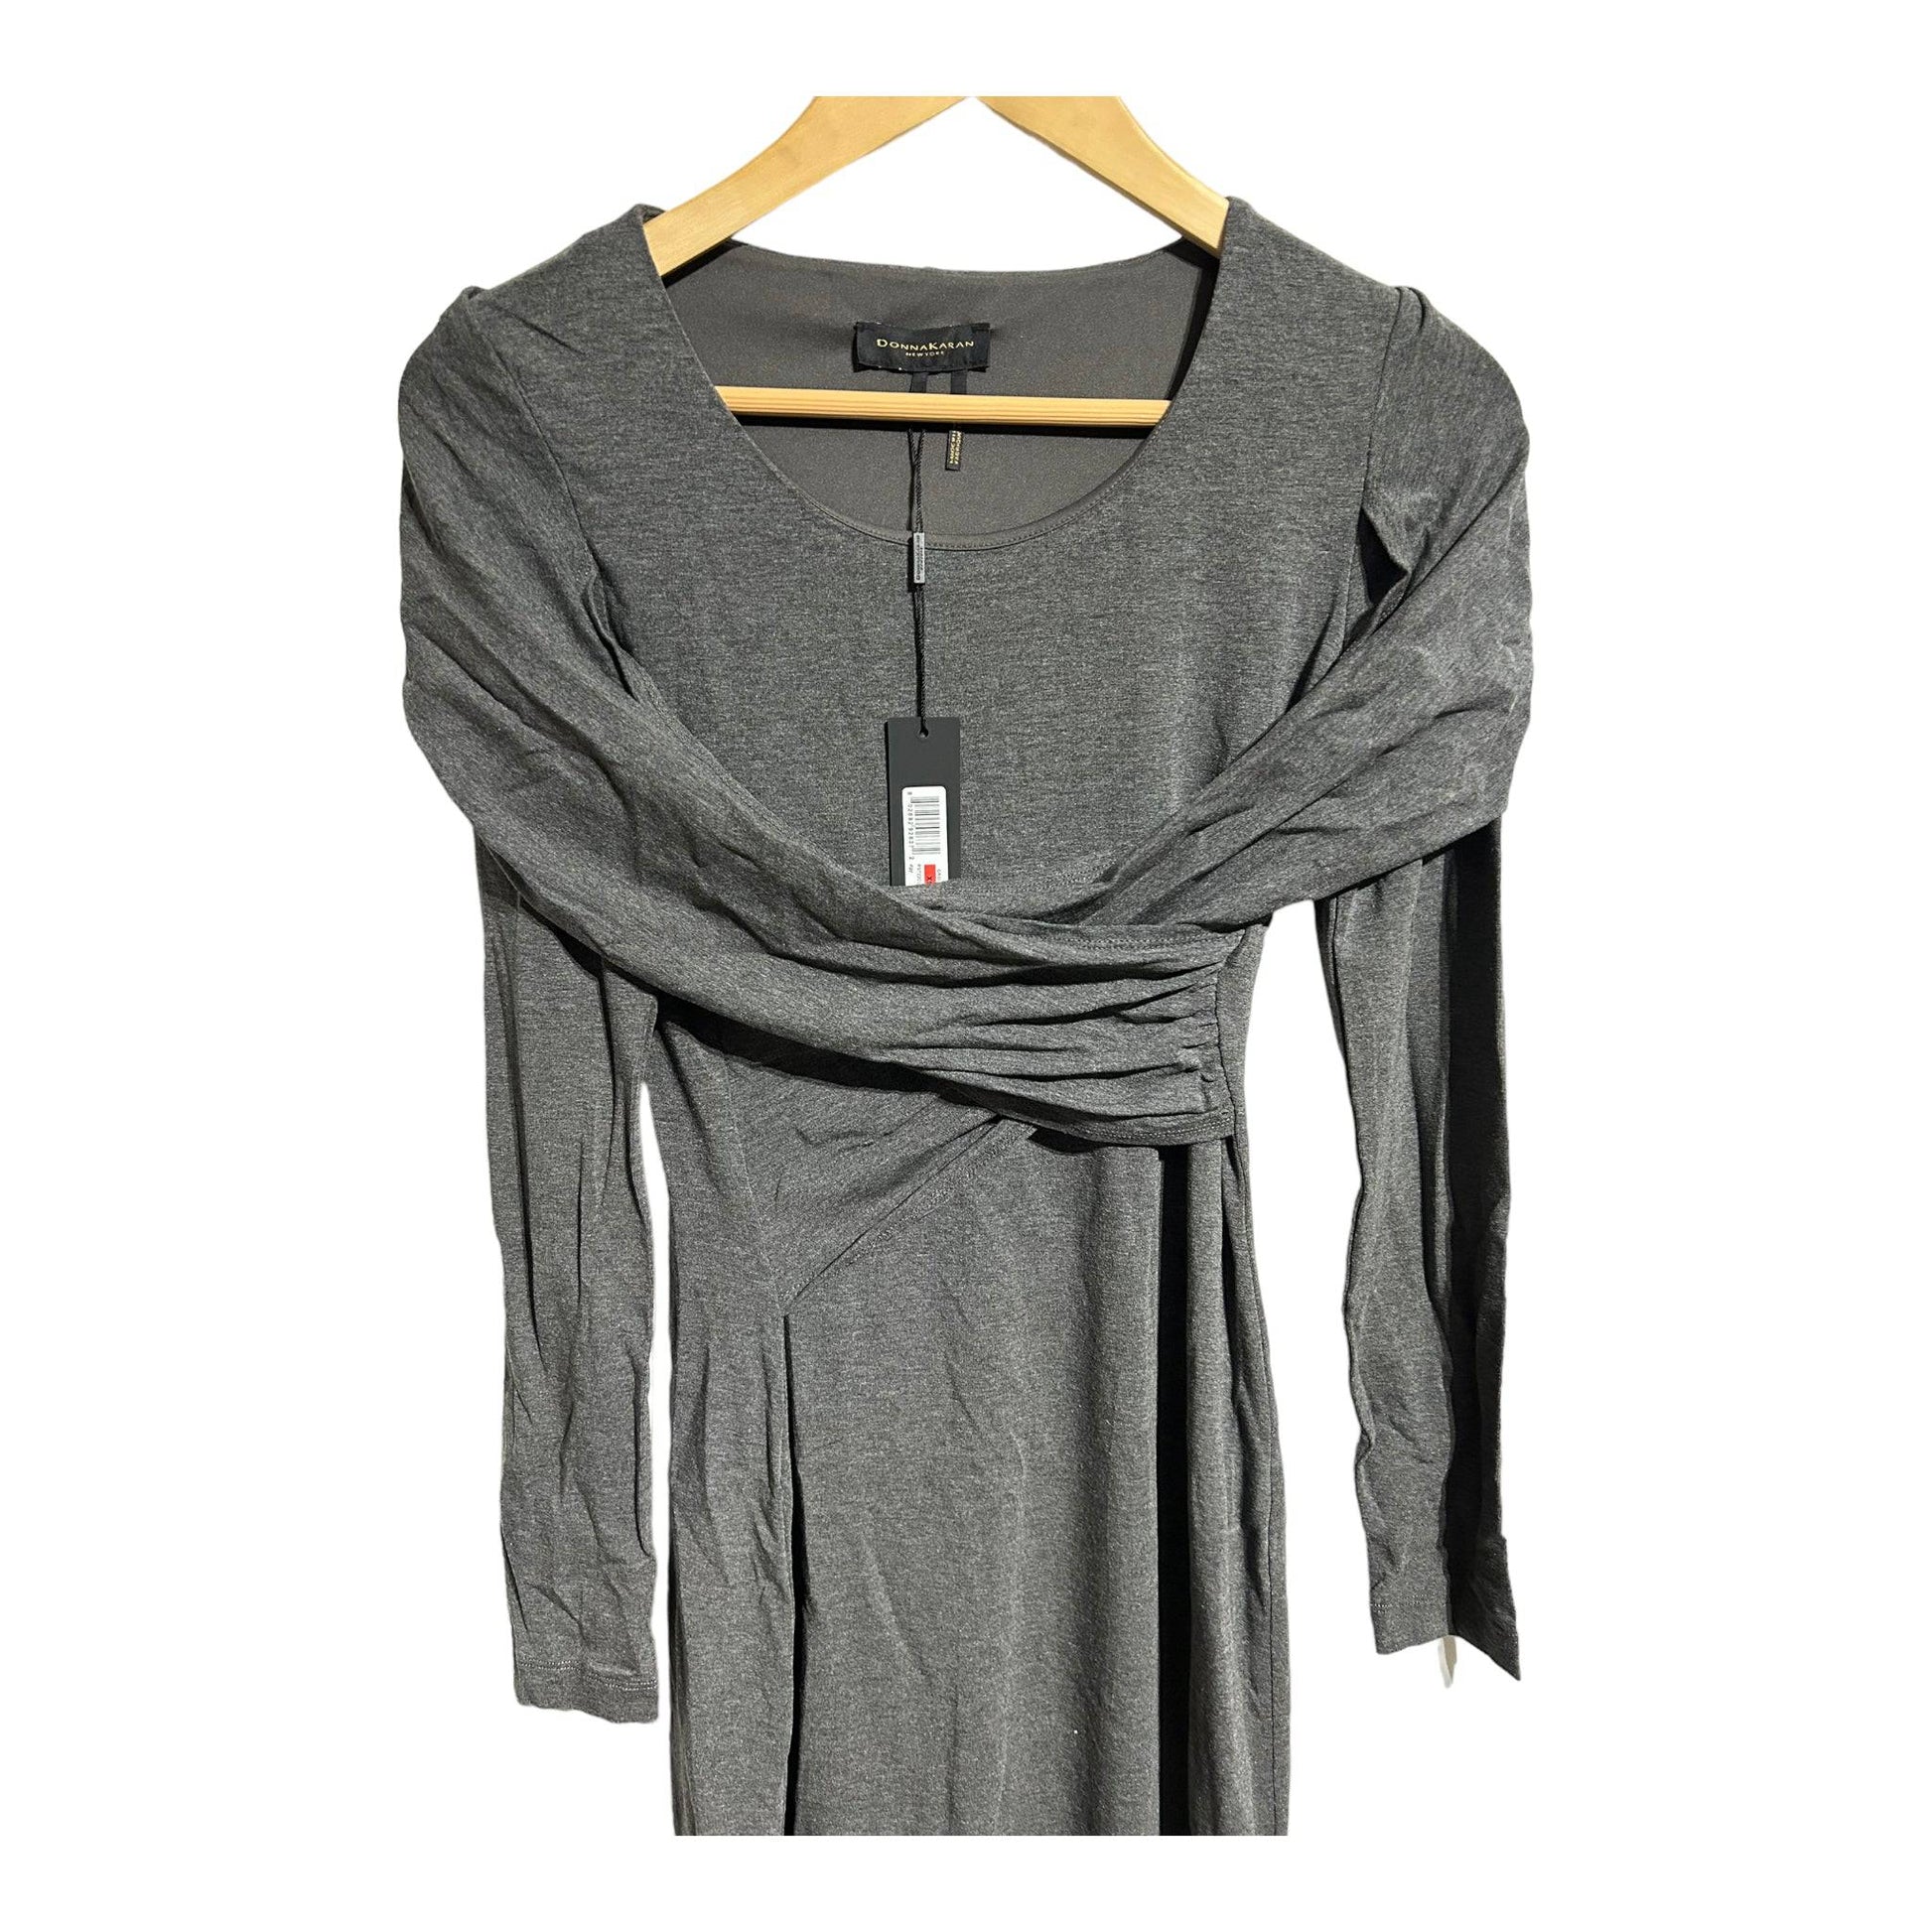 DKNY Long Sleeve Wrap Front Dress - Recurring.Life